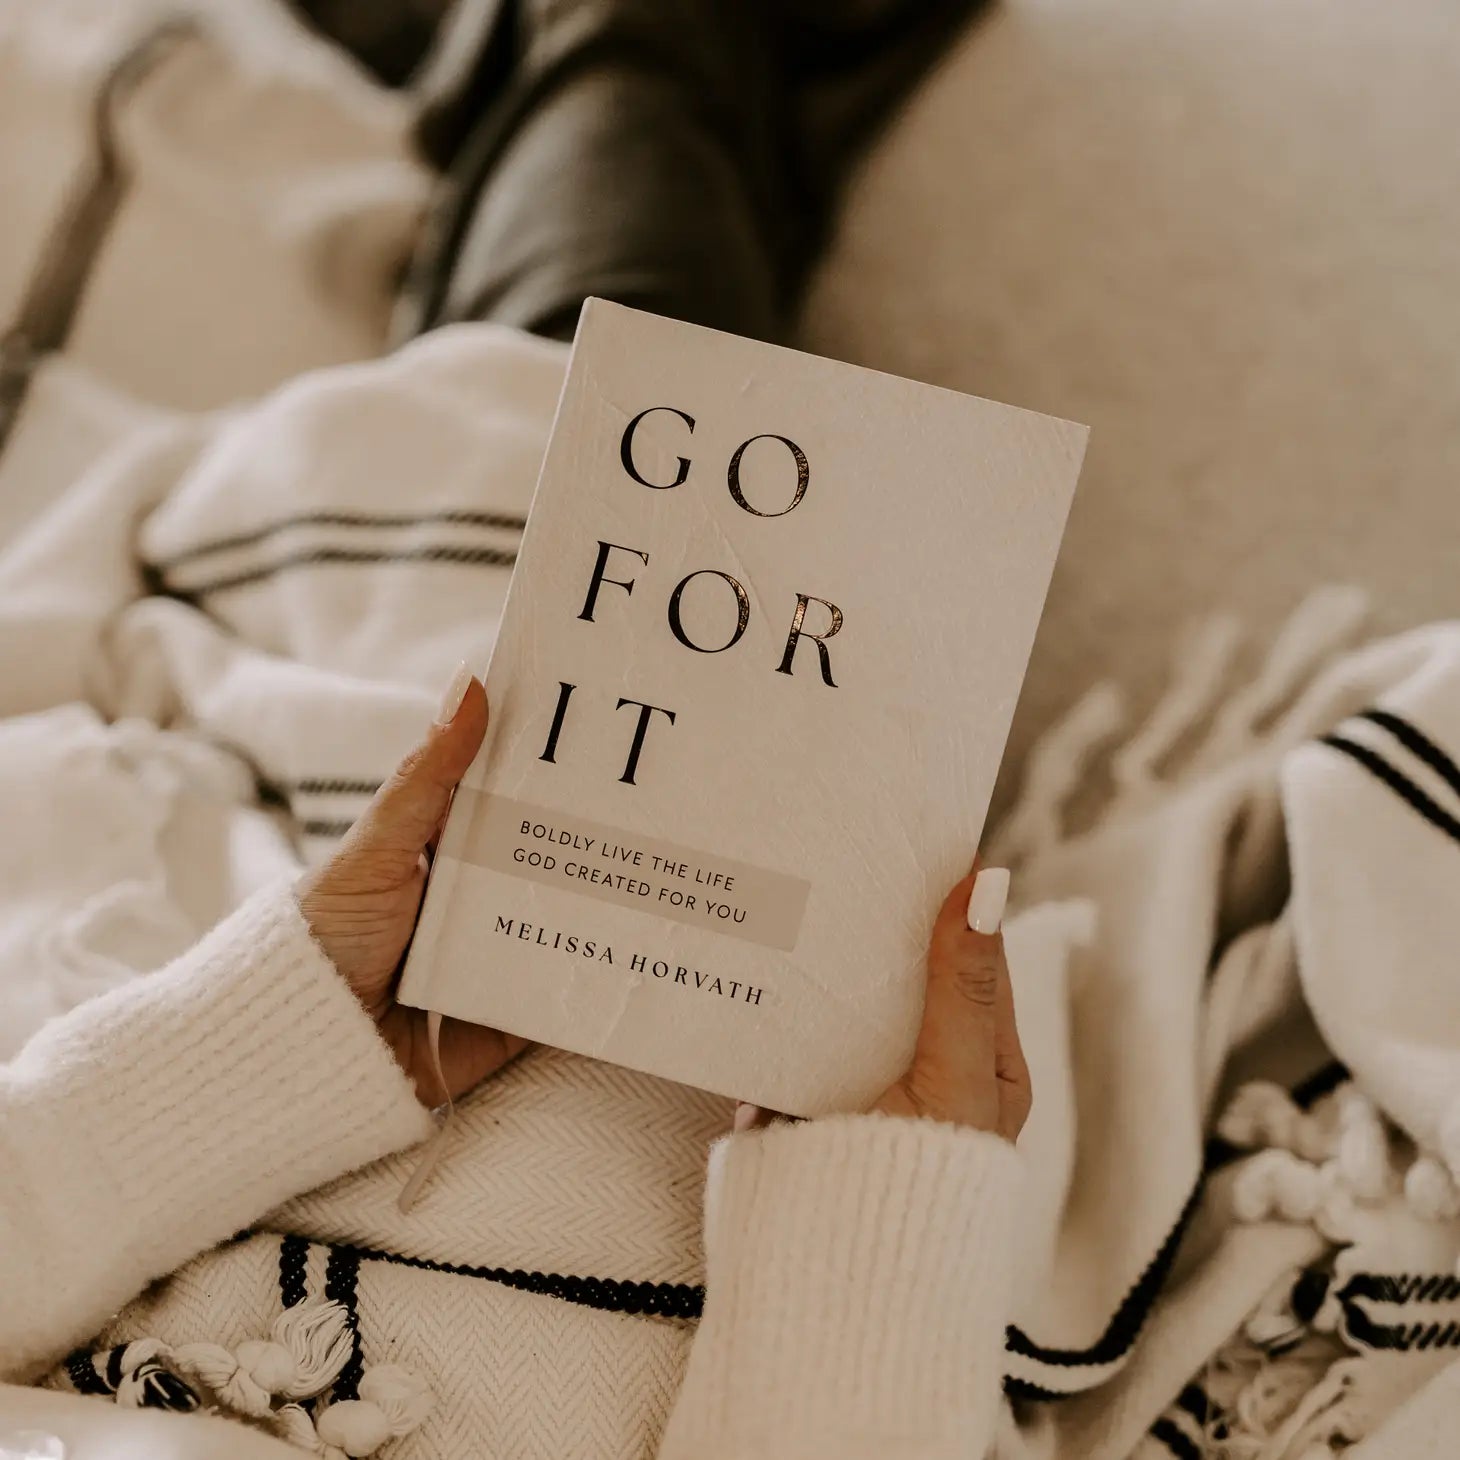 GO FOR IT | 90 Devotions to Boldly Live the Life God Created